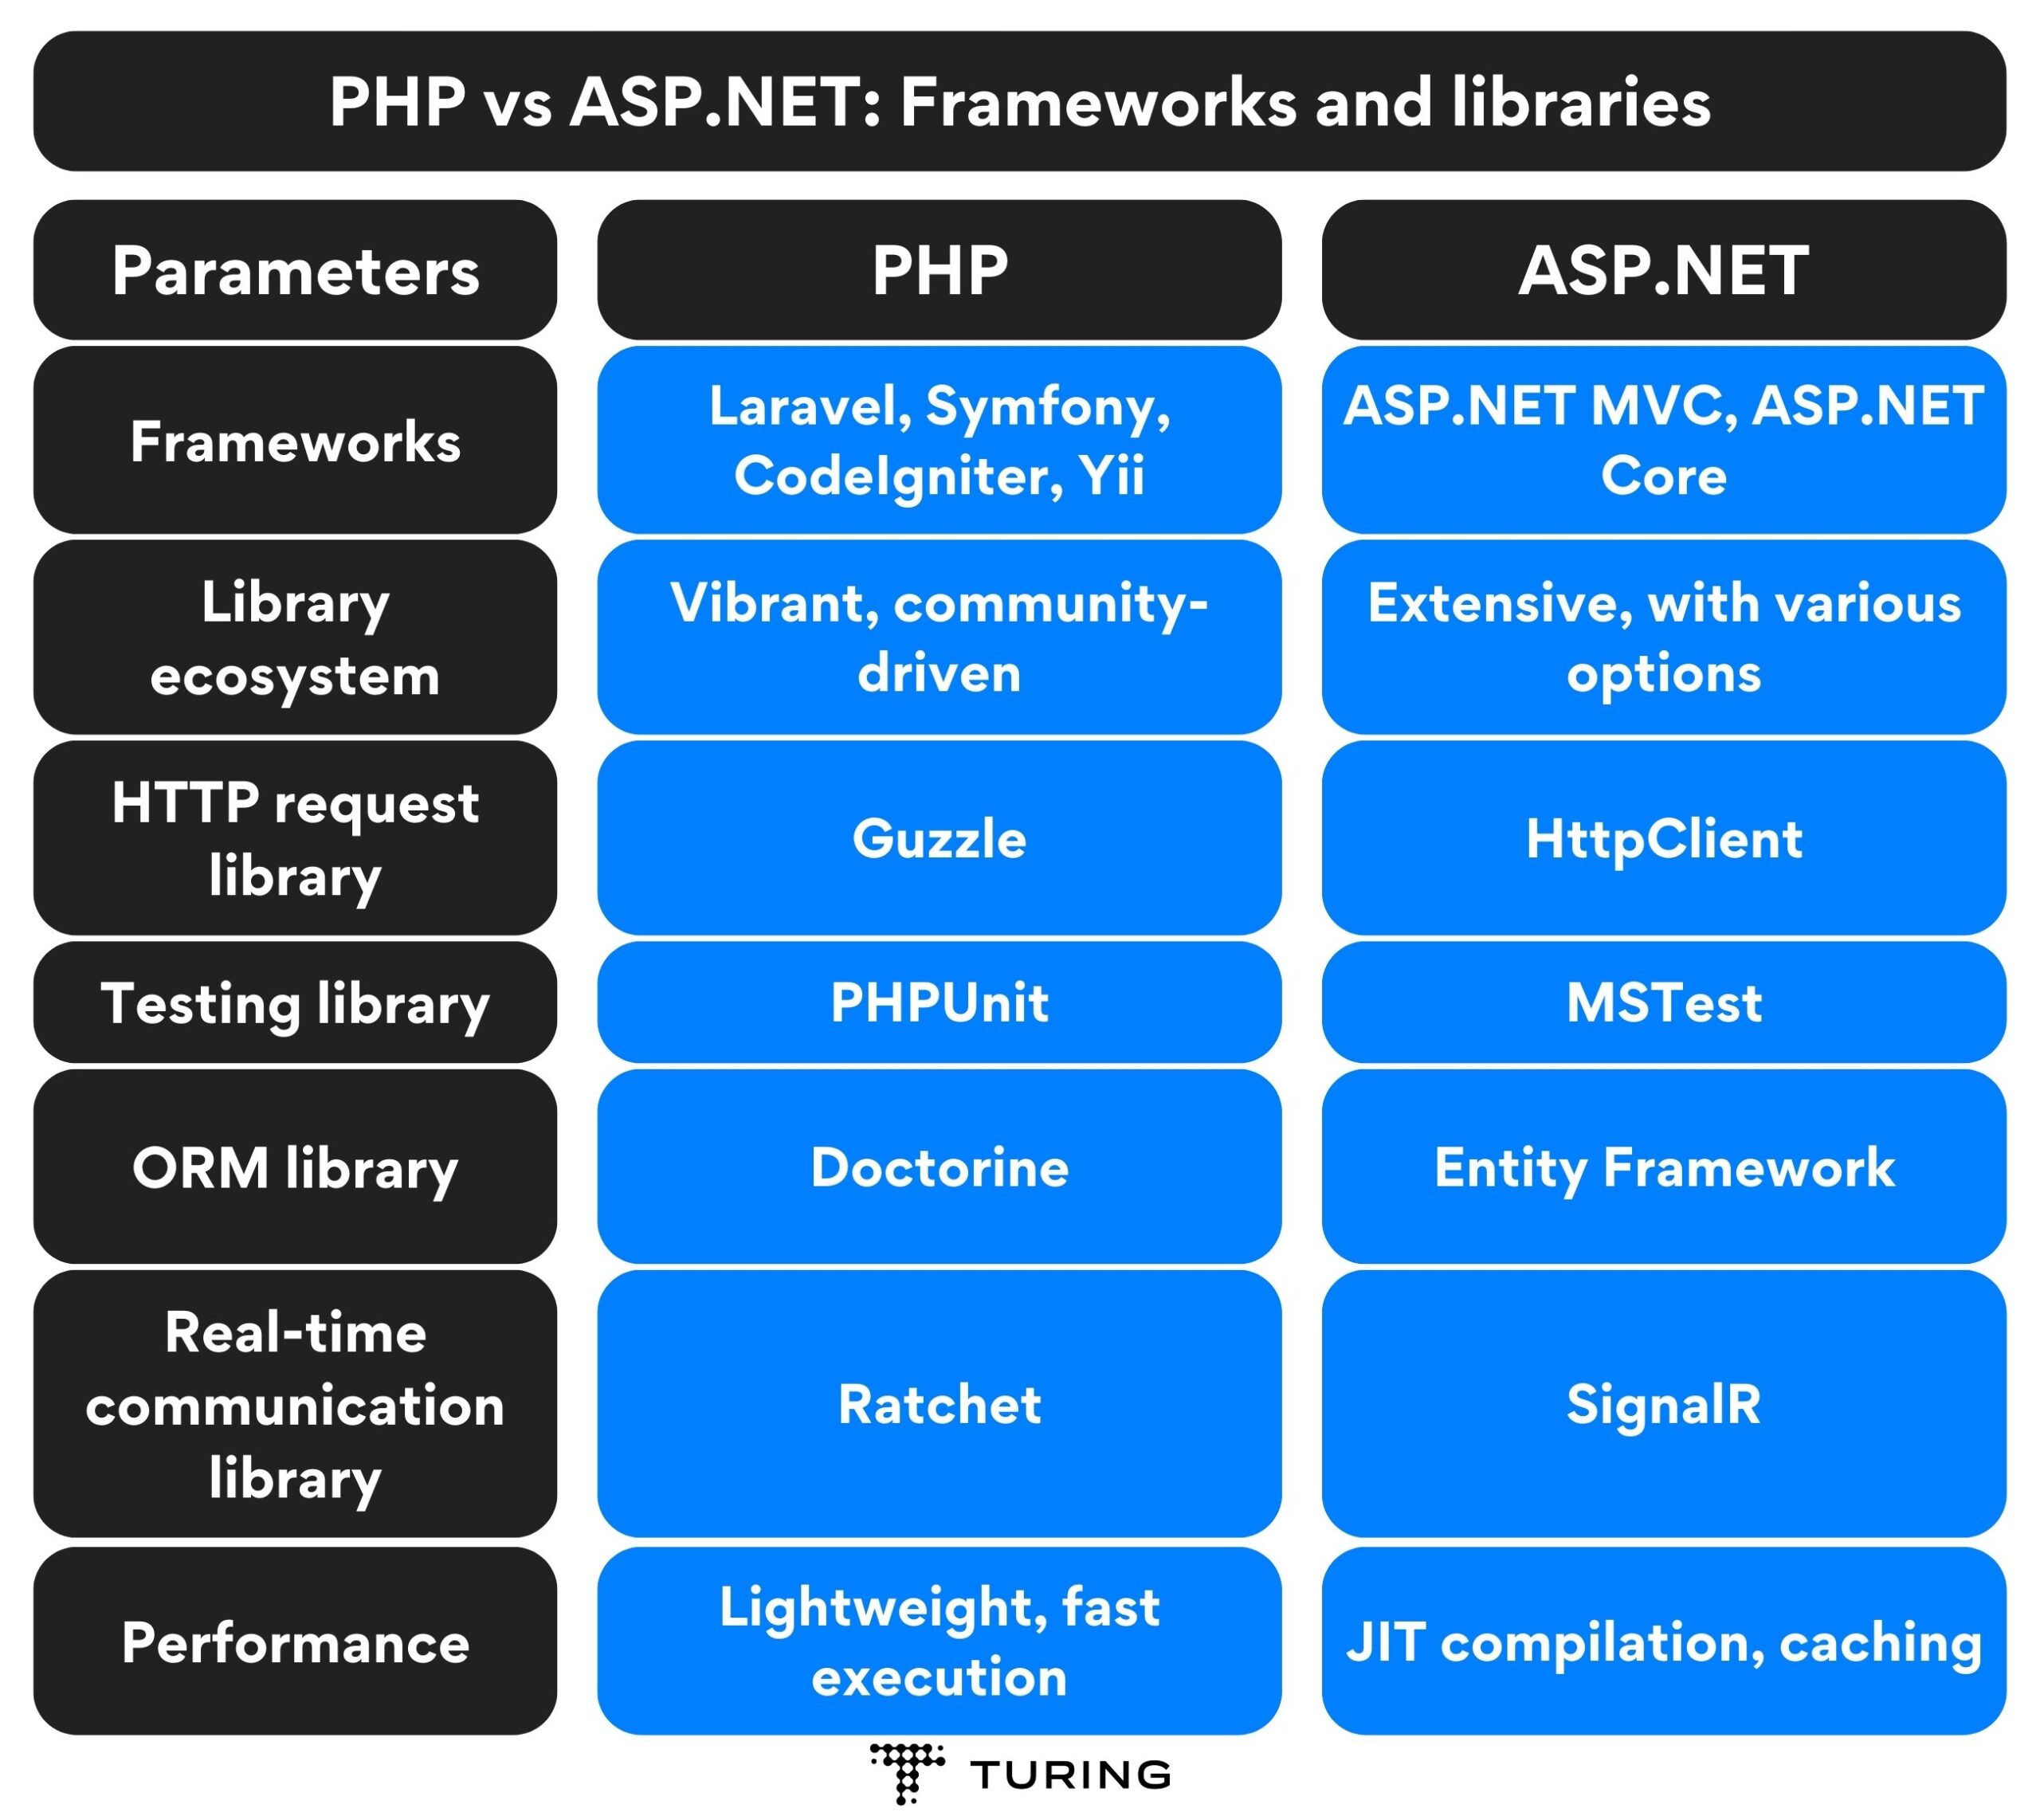 PHP vs ASP.NET: Frameworks and libraries